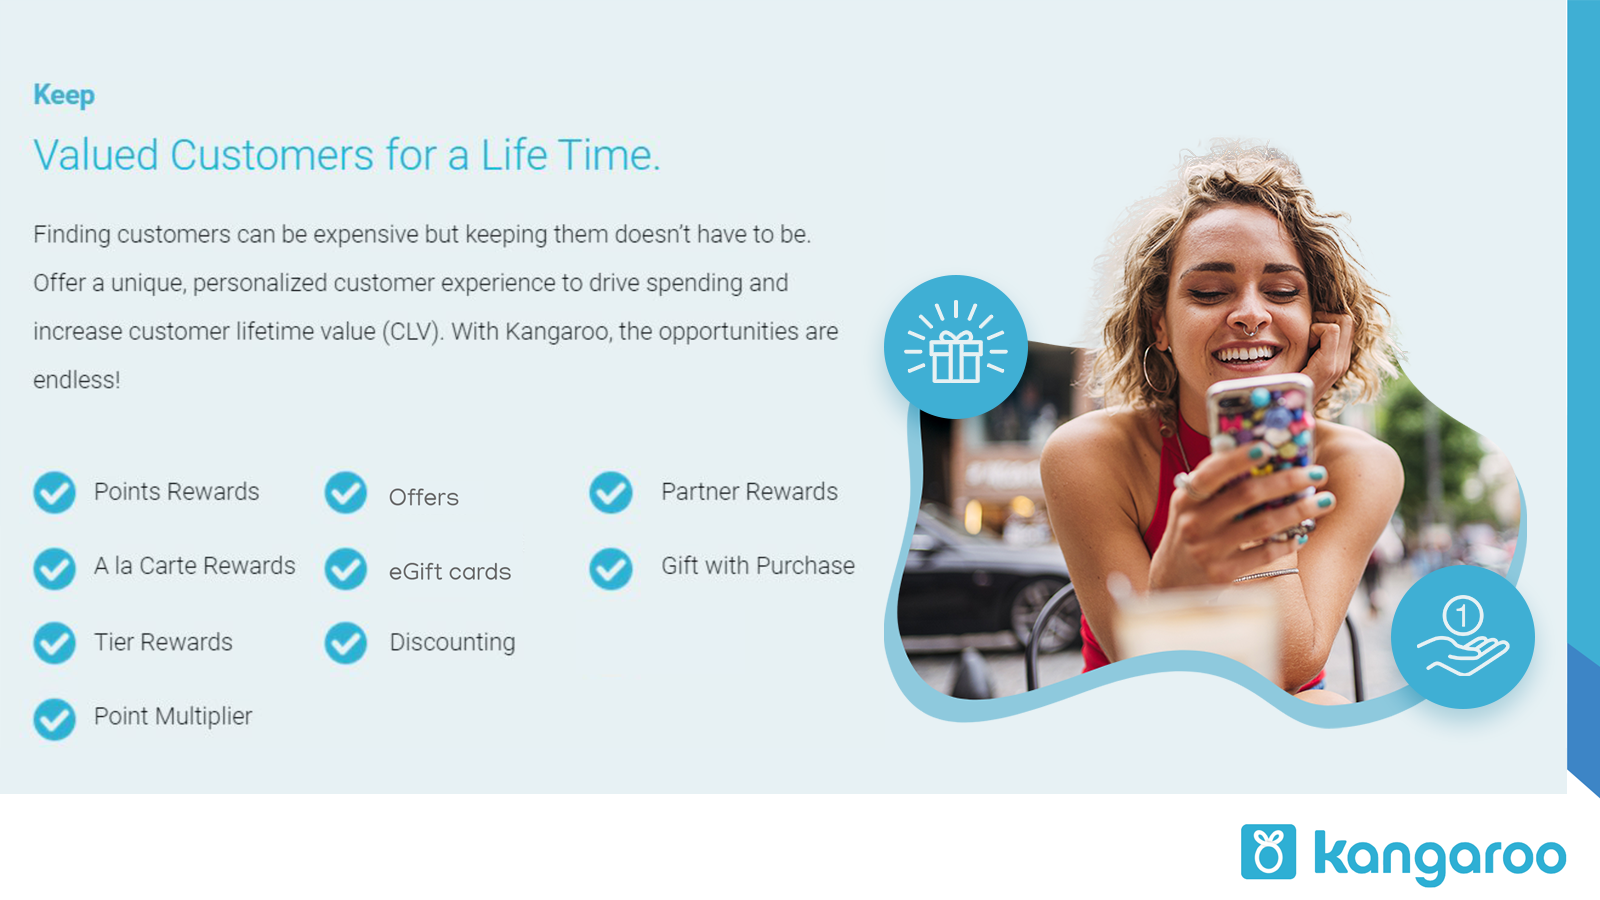 Keep customers coming back and spending more with rewards.